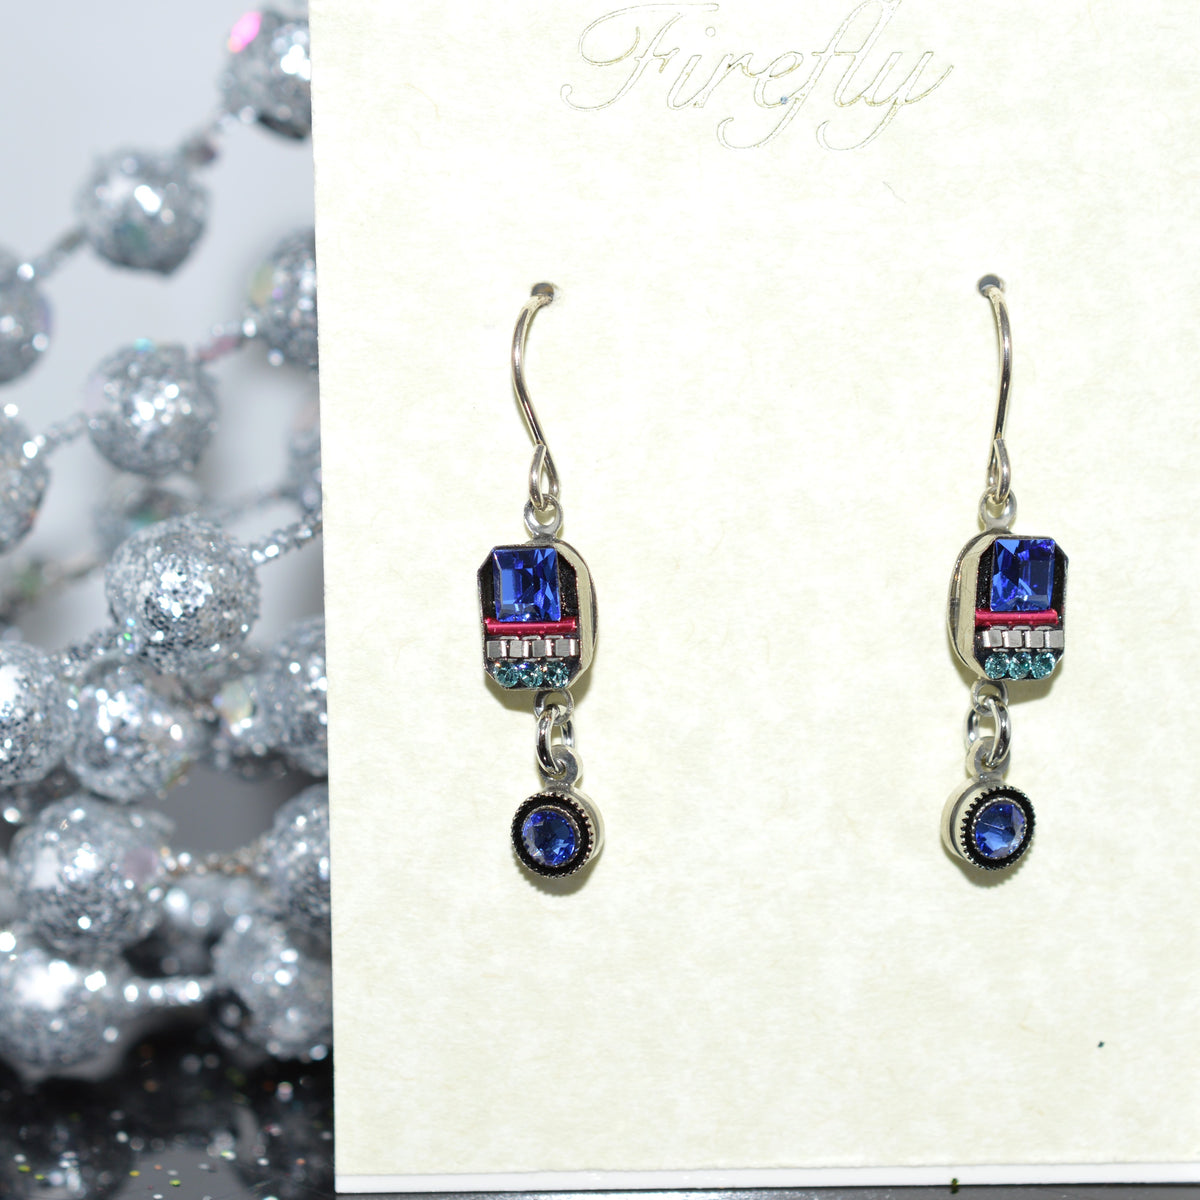 Antique Silver Plated Earrings With Sapphire Colored Crystals by Firefly